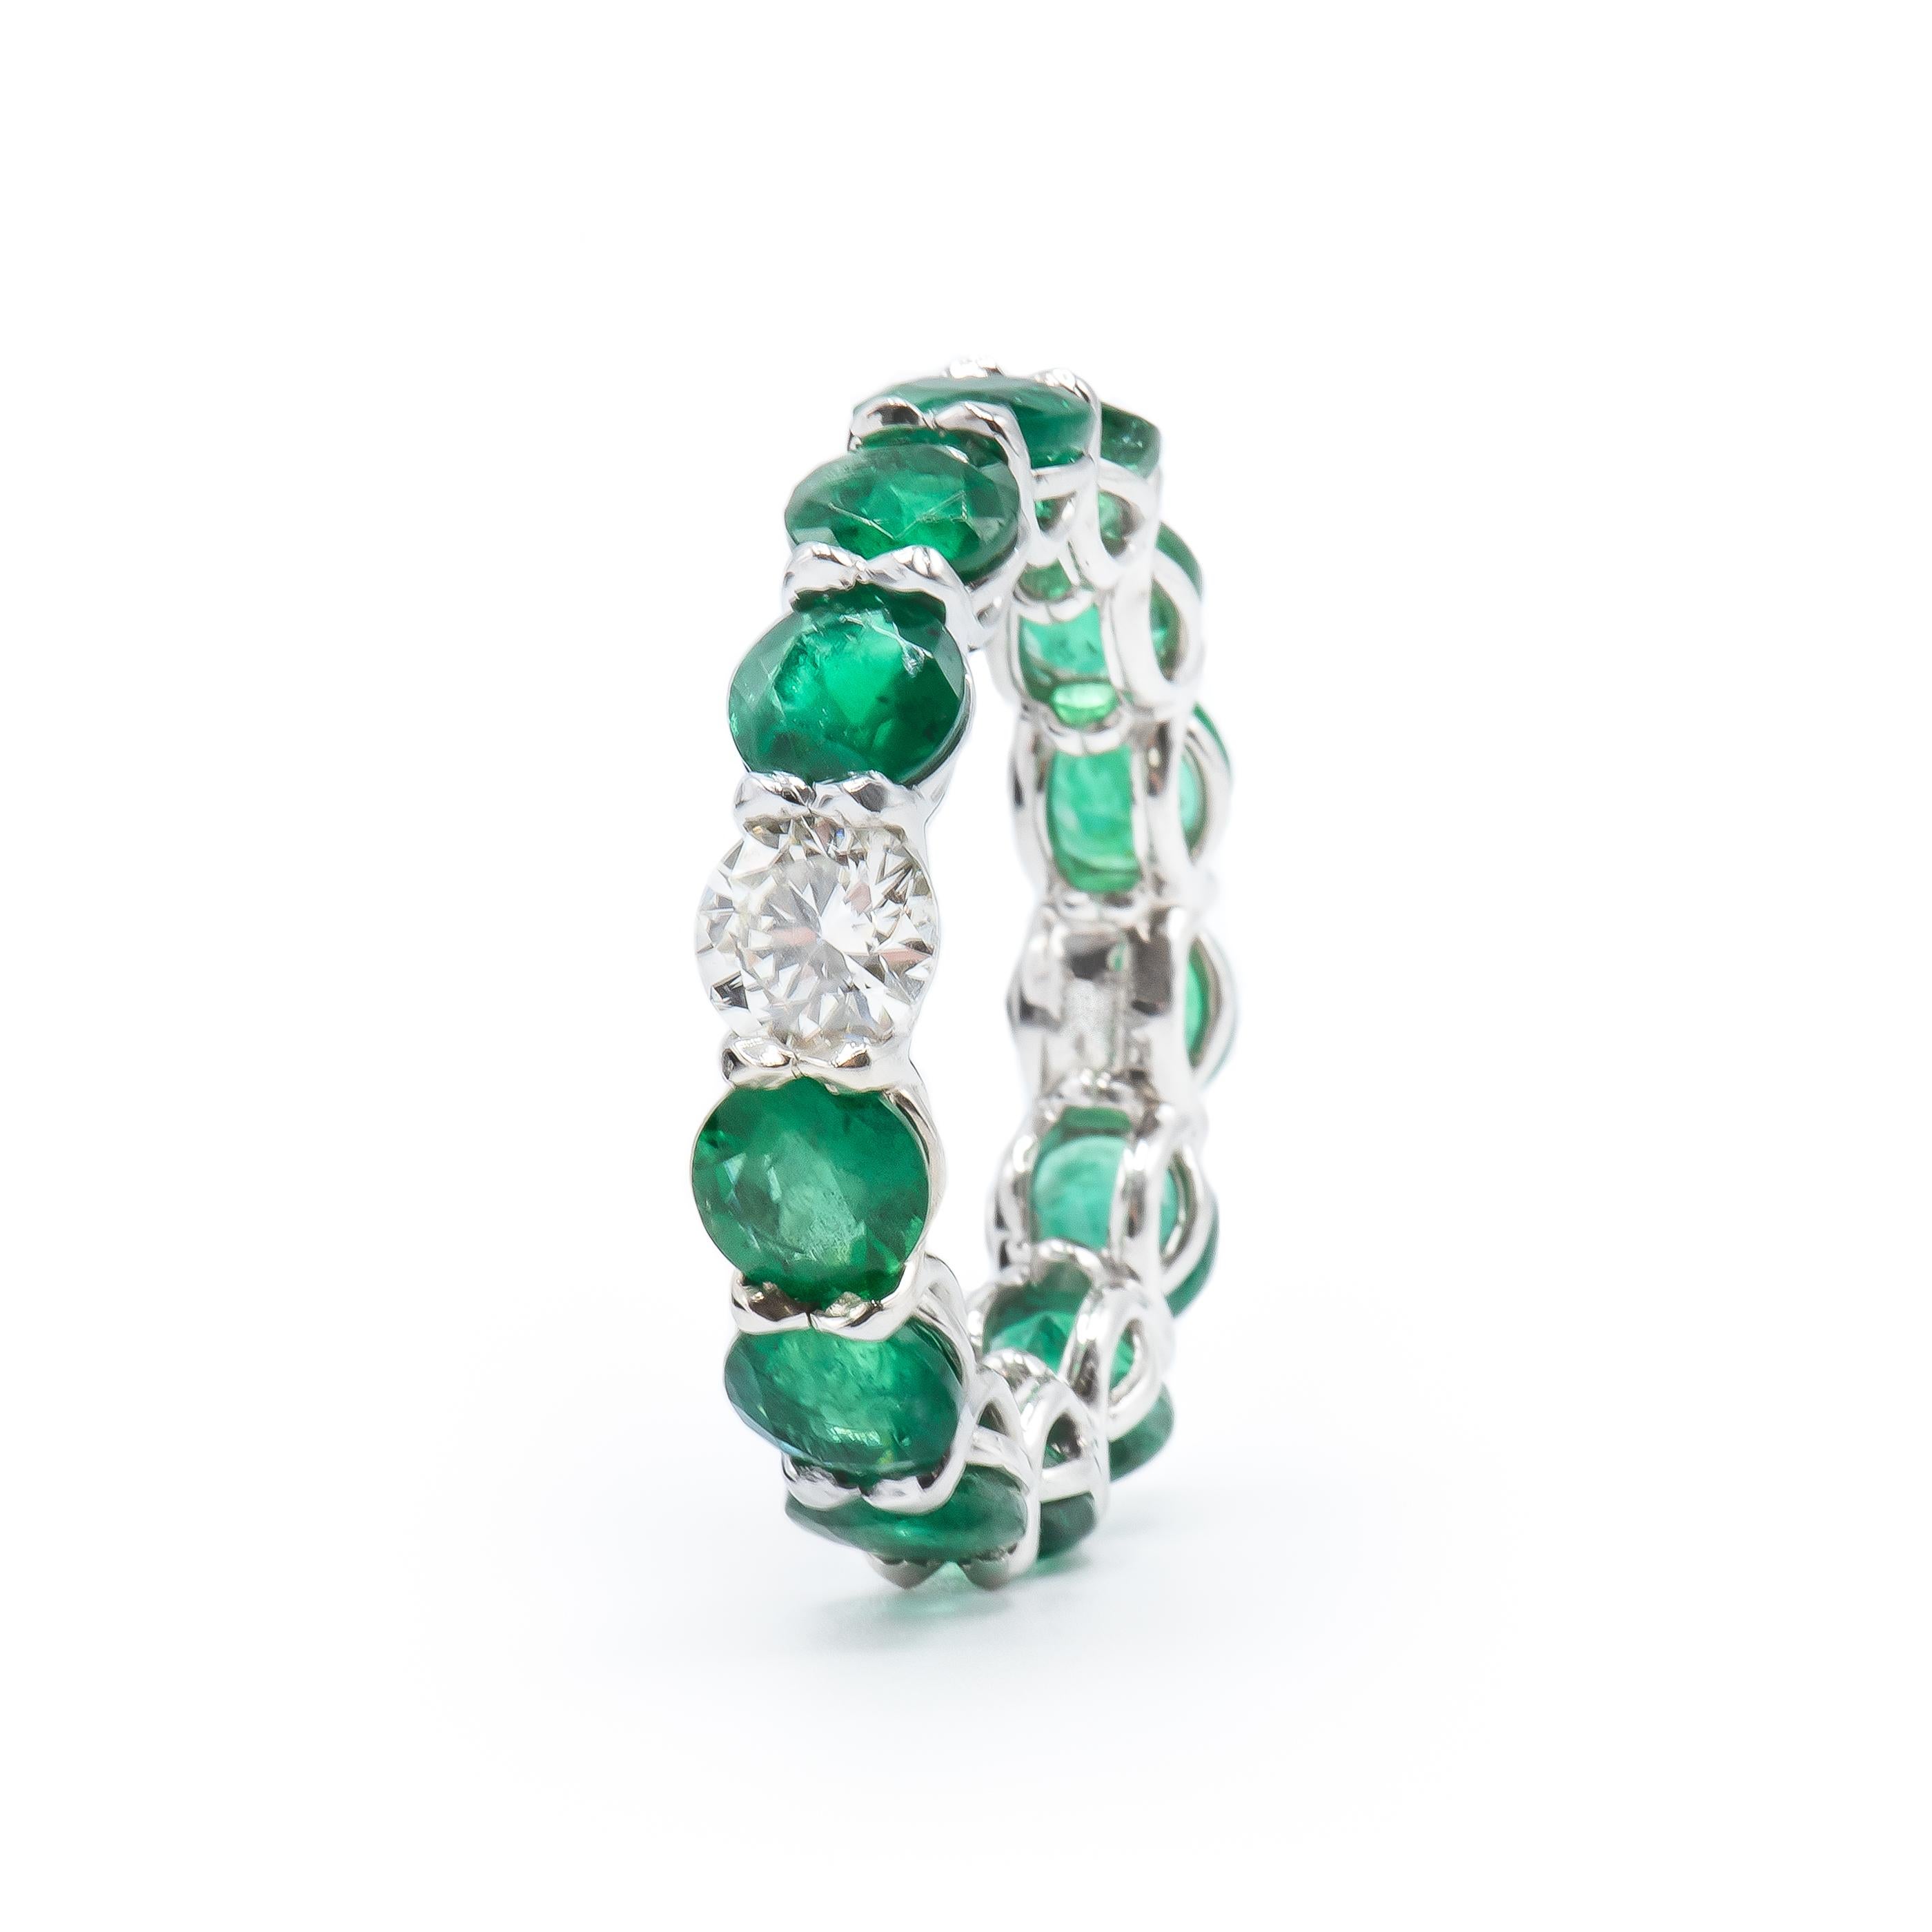 This beautiful Ring features 13 Green Emeralds with 1 Round Brilliant Diamond center totaling 6.46 Carats.

13 Emeralds weigh 5.95 Carats.
1 Diamond weighs 0.51 Carats.
Set in Platinum.
Finger Size 6